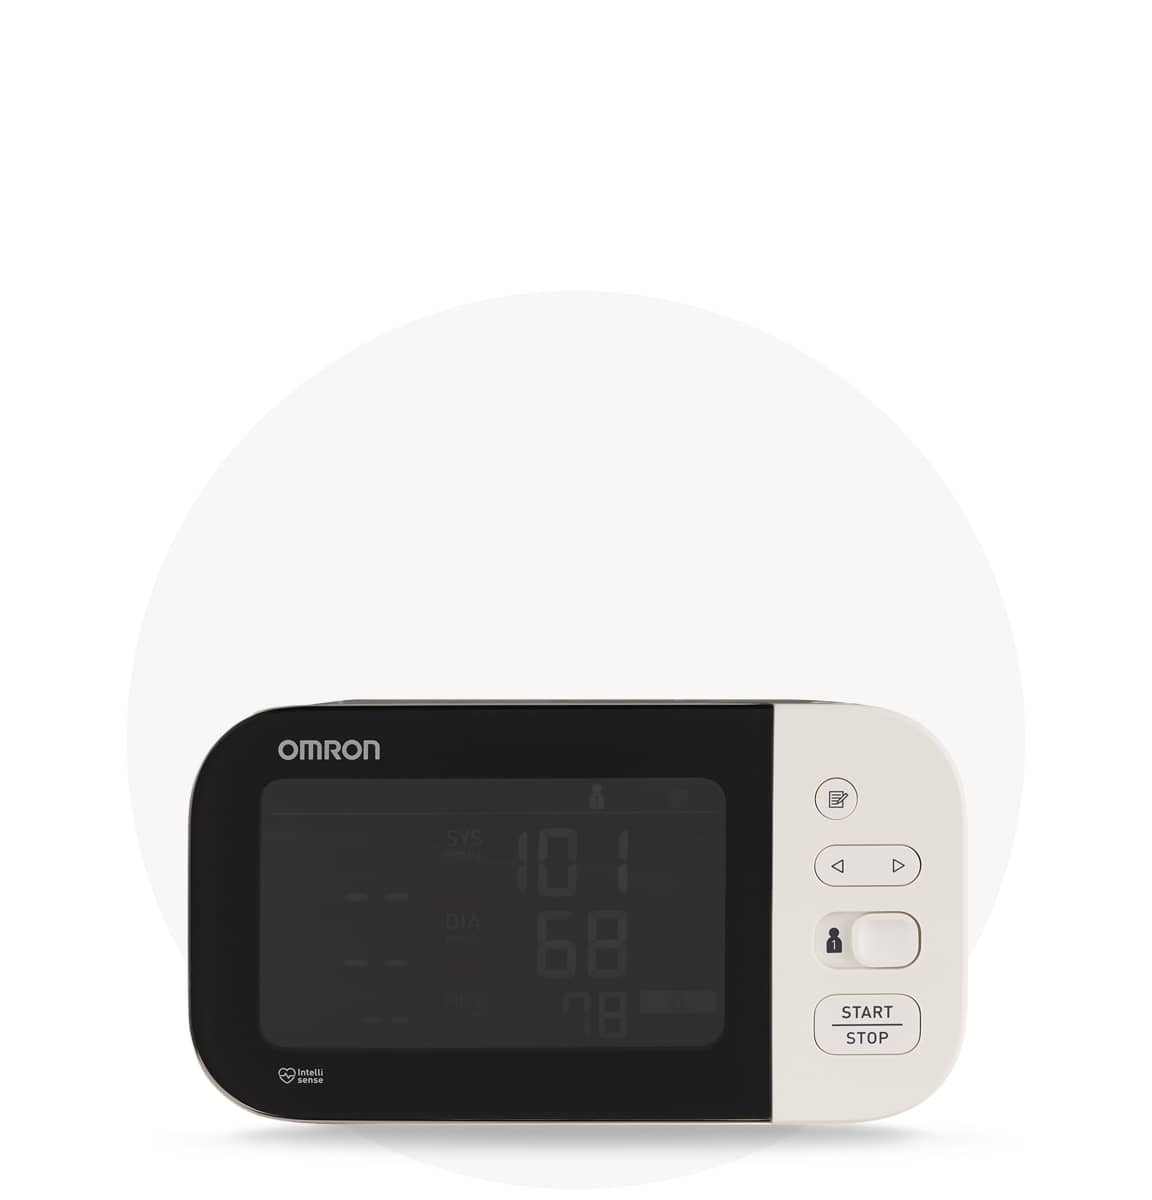 Shop for Omron 10 Series® blood pressure monitor